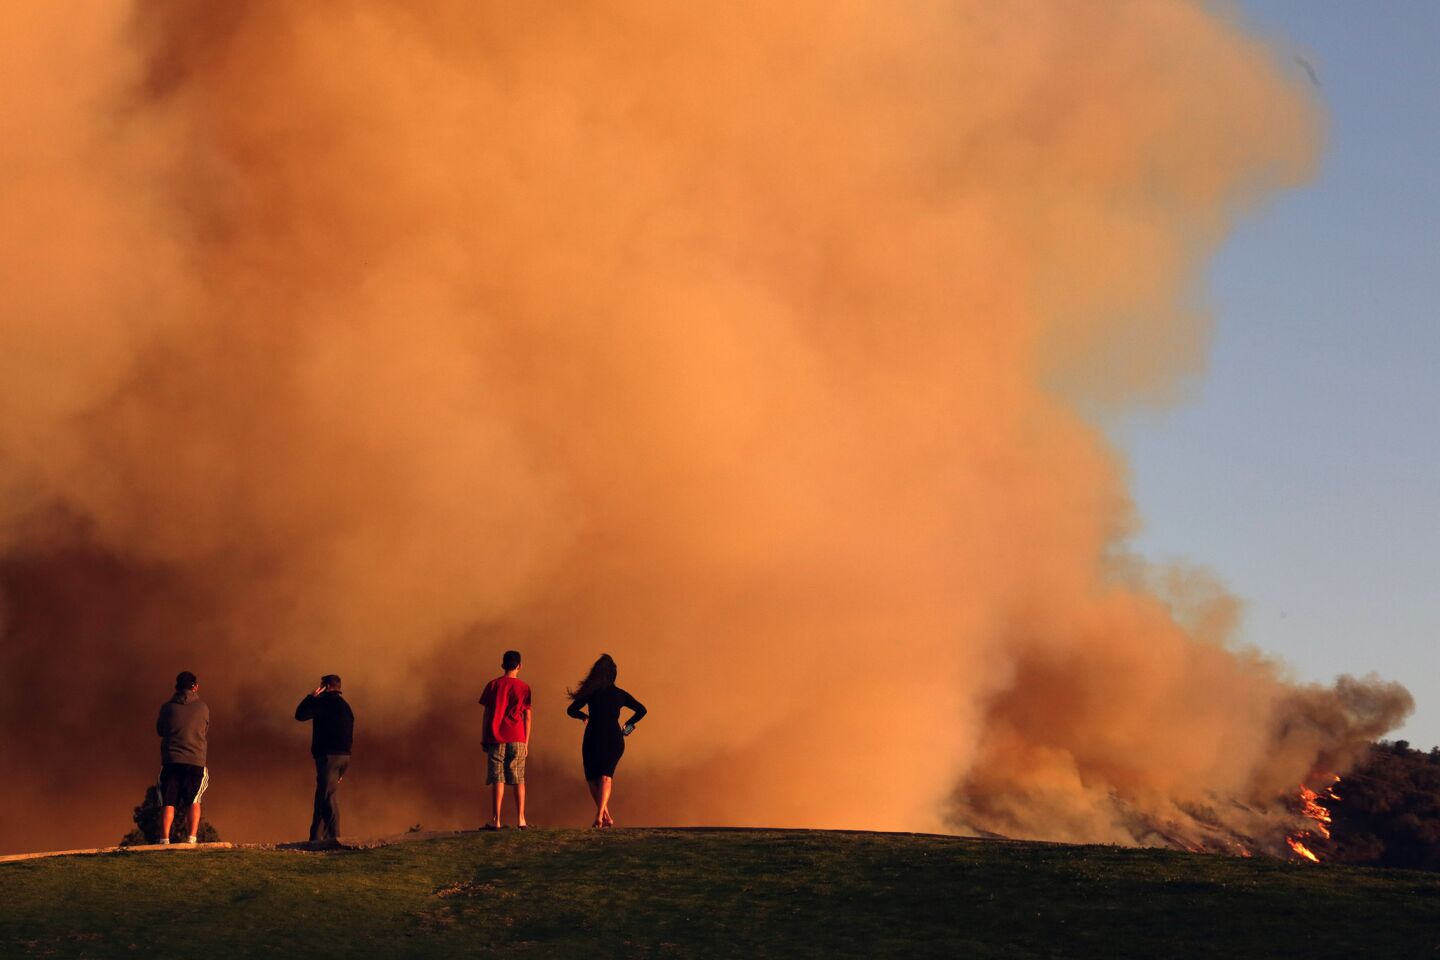 Spectators watch as the Colby fire continues to burn on the edge of the Angeles National Forest in January.